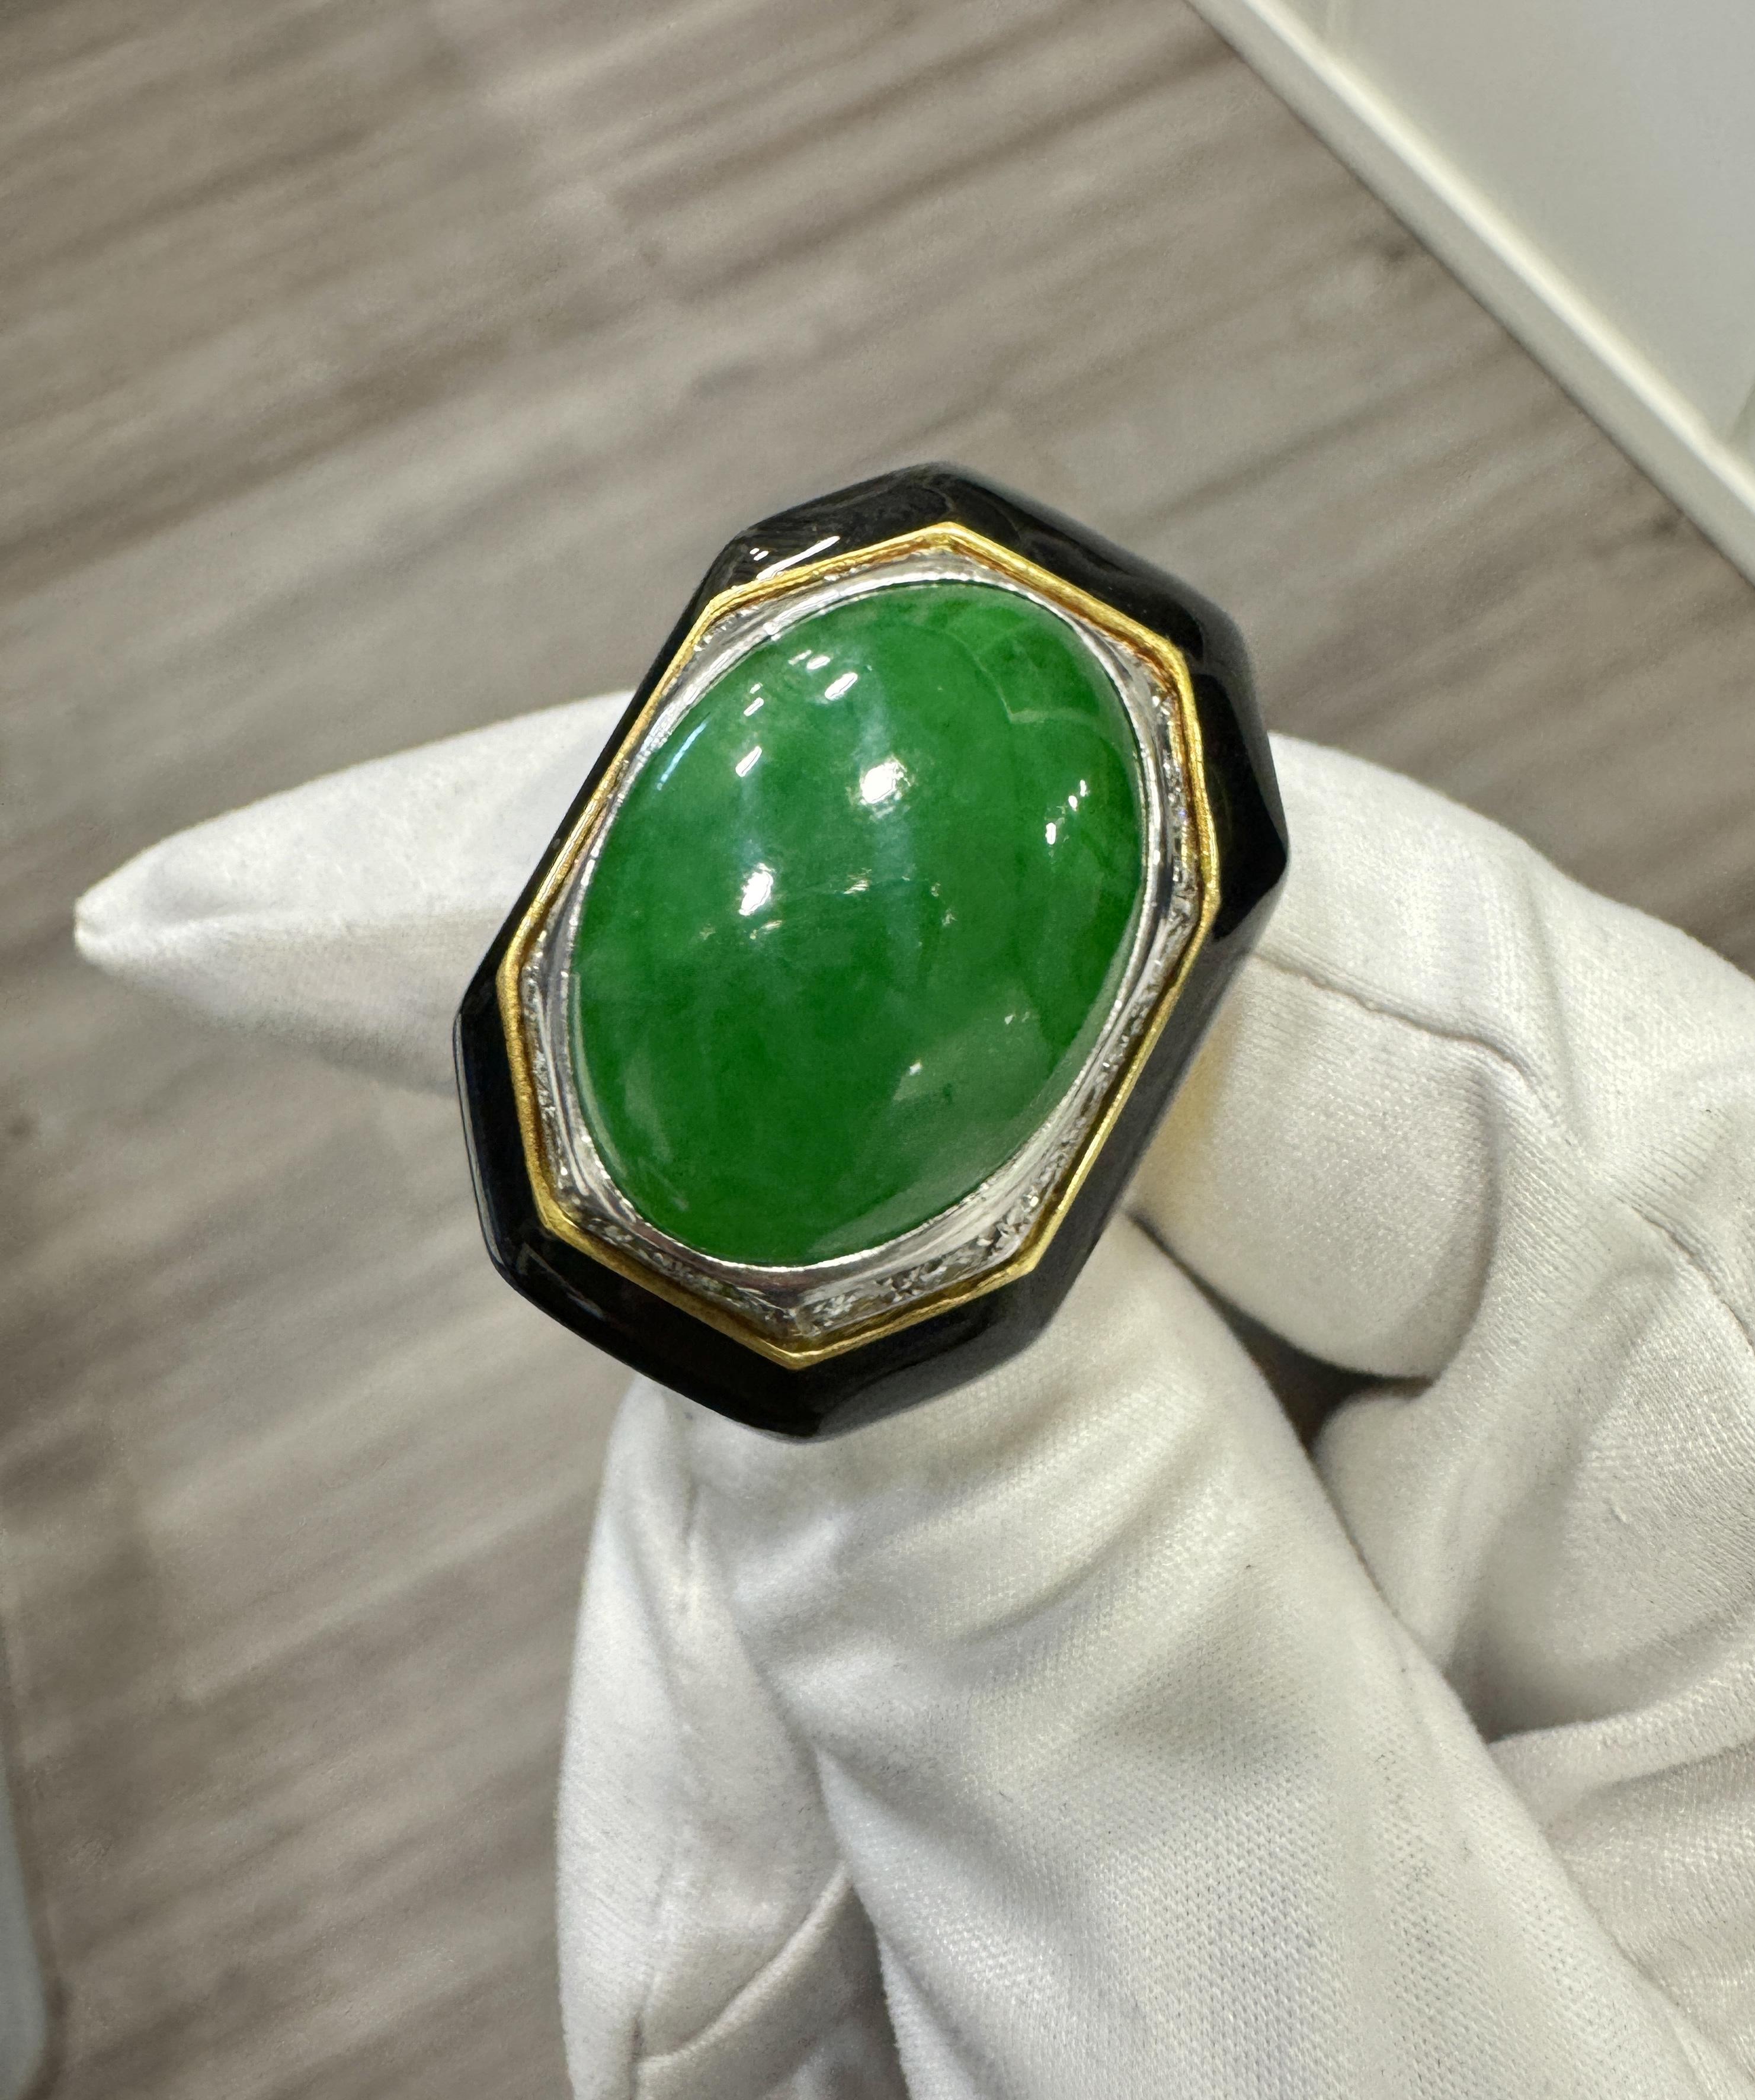 Contemporary David Webb Signed Type A Fei Chui Jadeite Jade and Onyx Platinum & 18K Ring For Sale